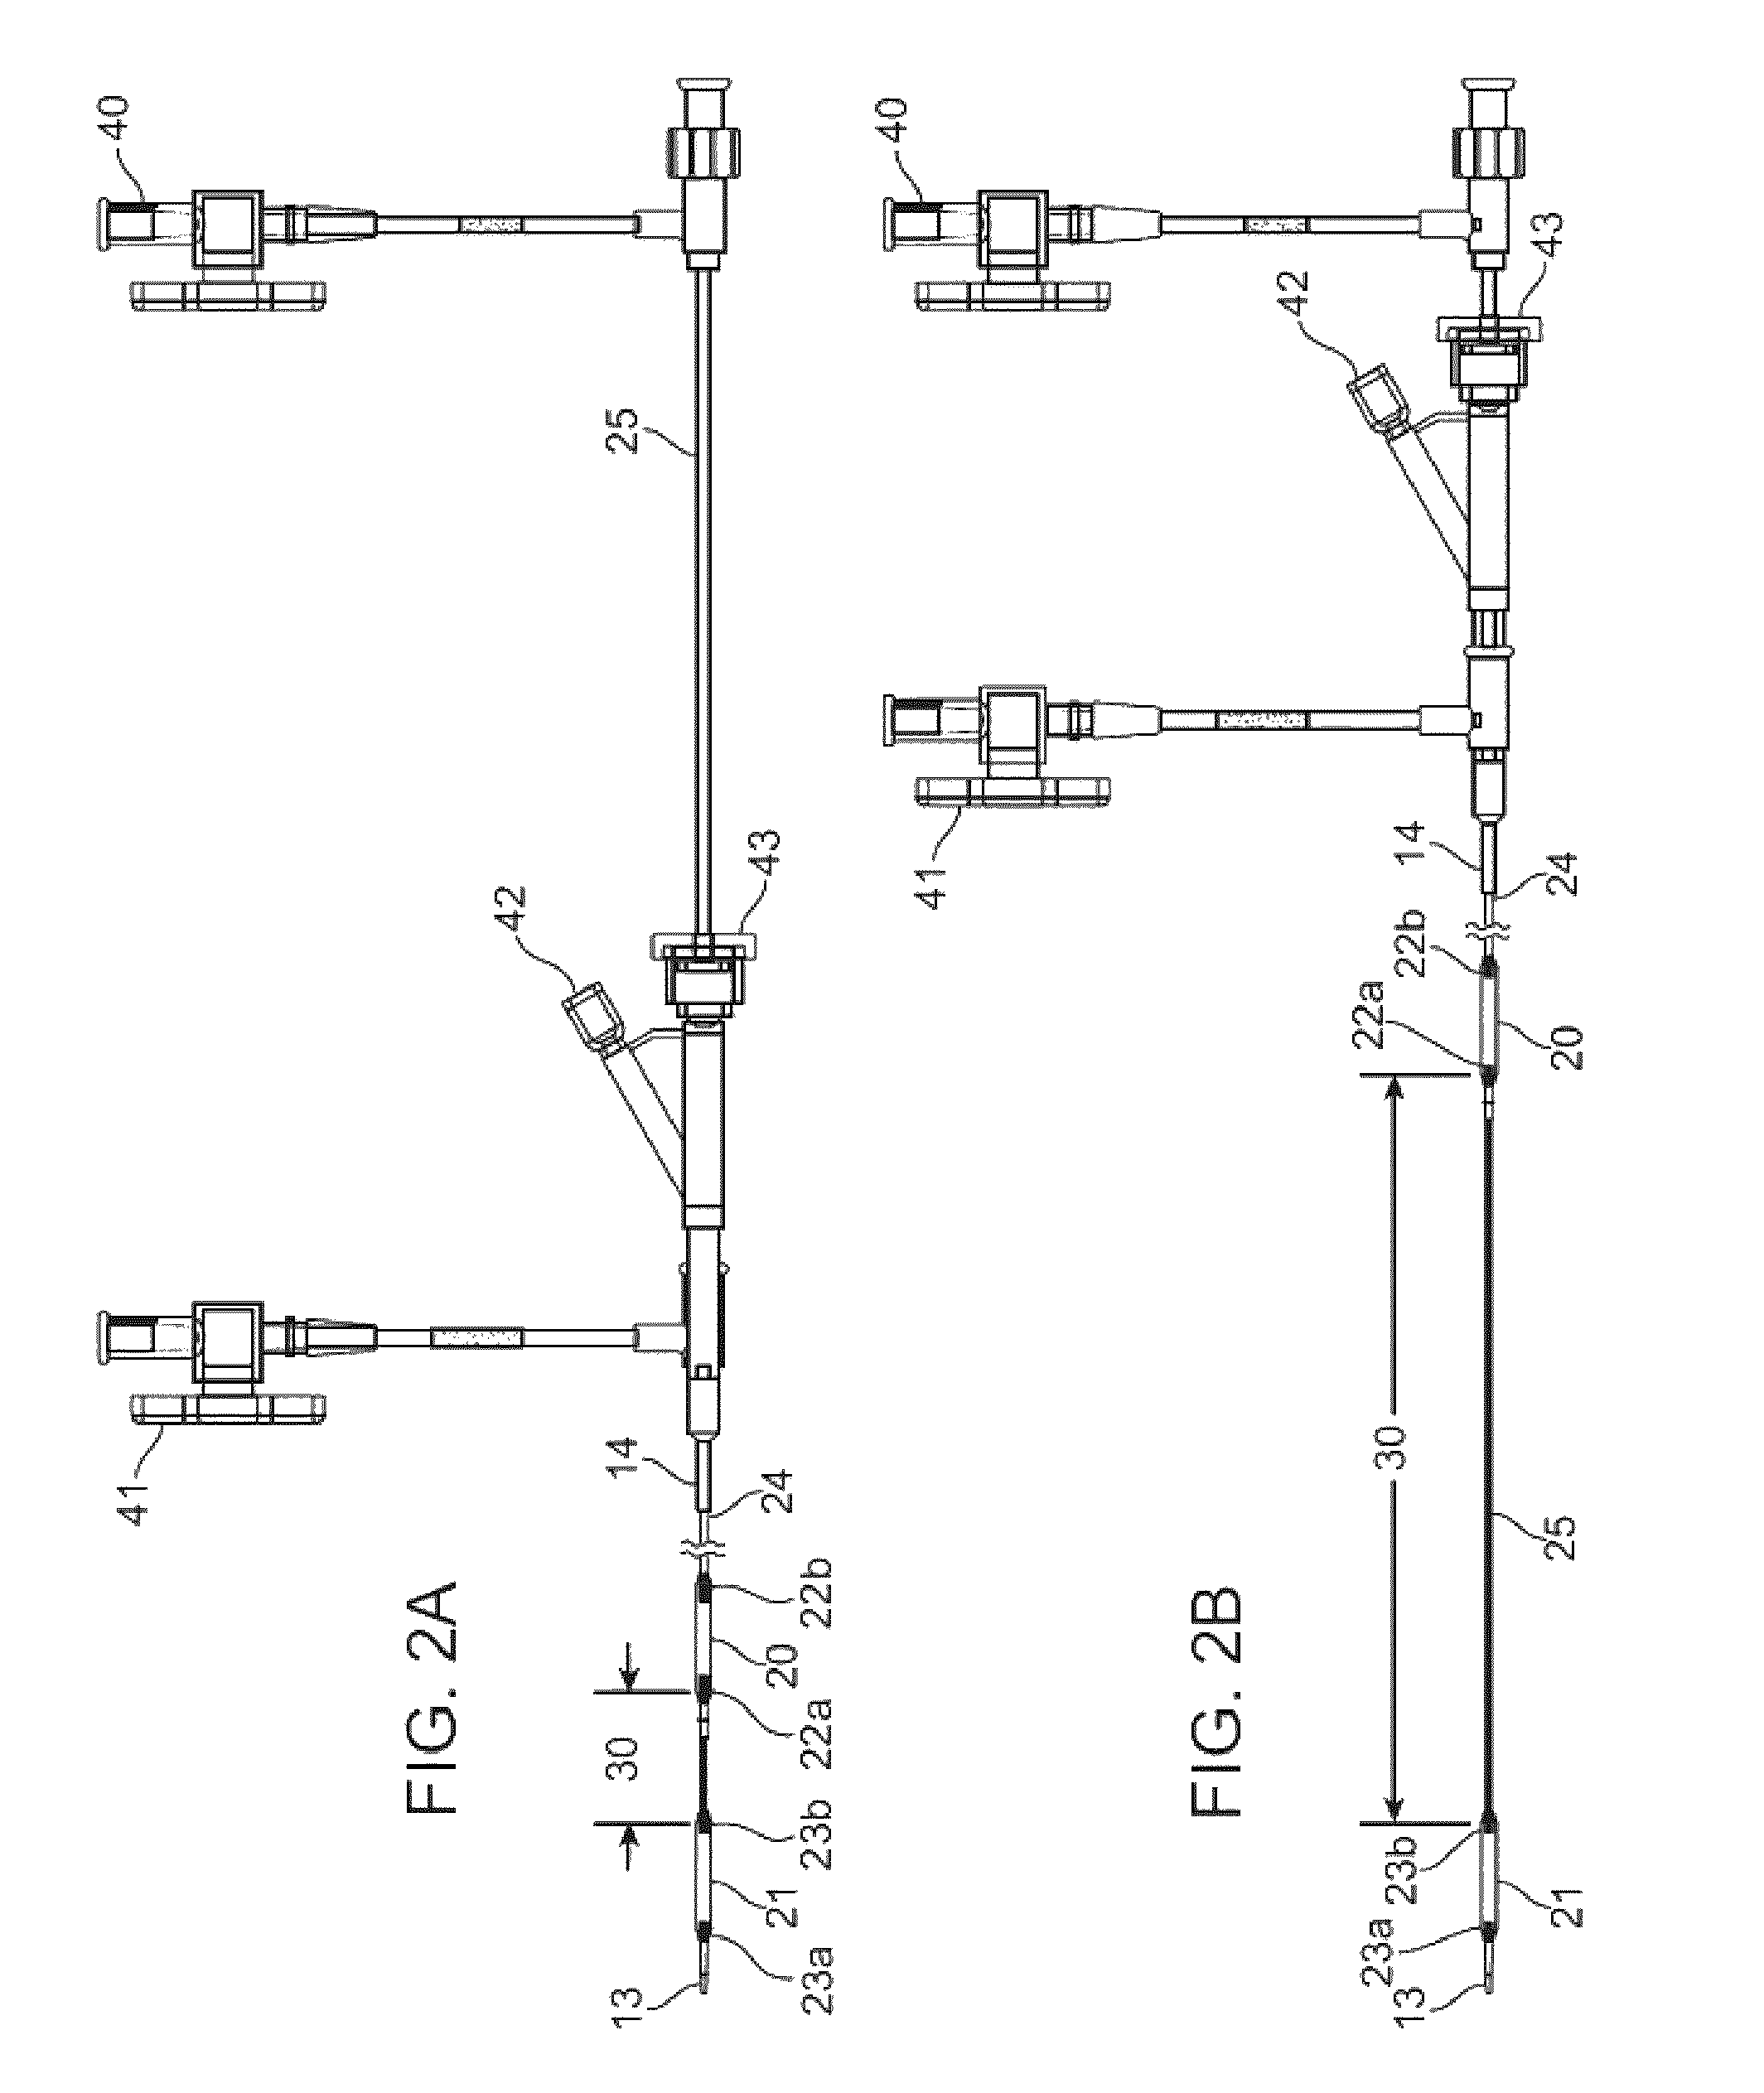 Double balloon catheter and methods for homogeneous drug delivery using the same